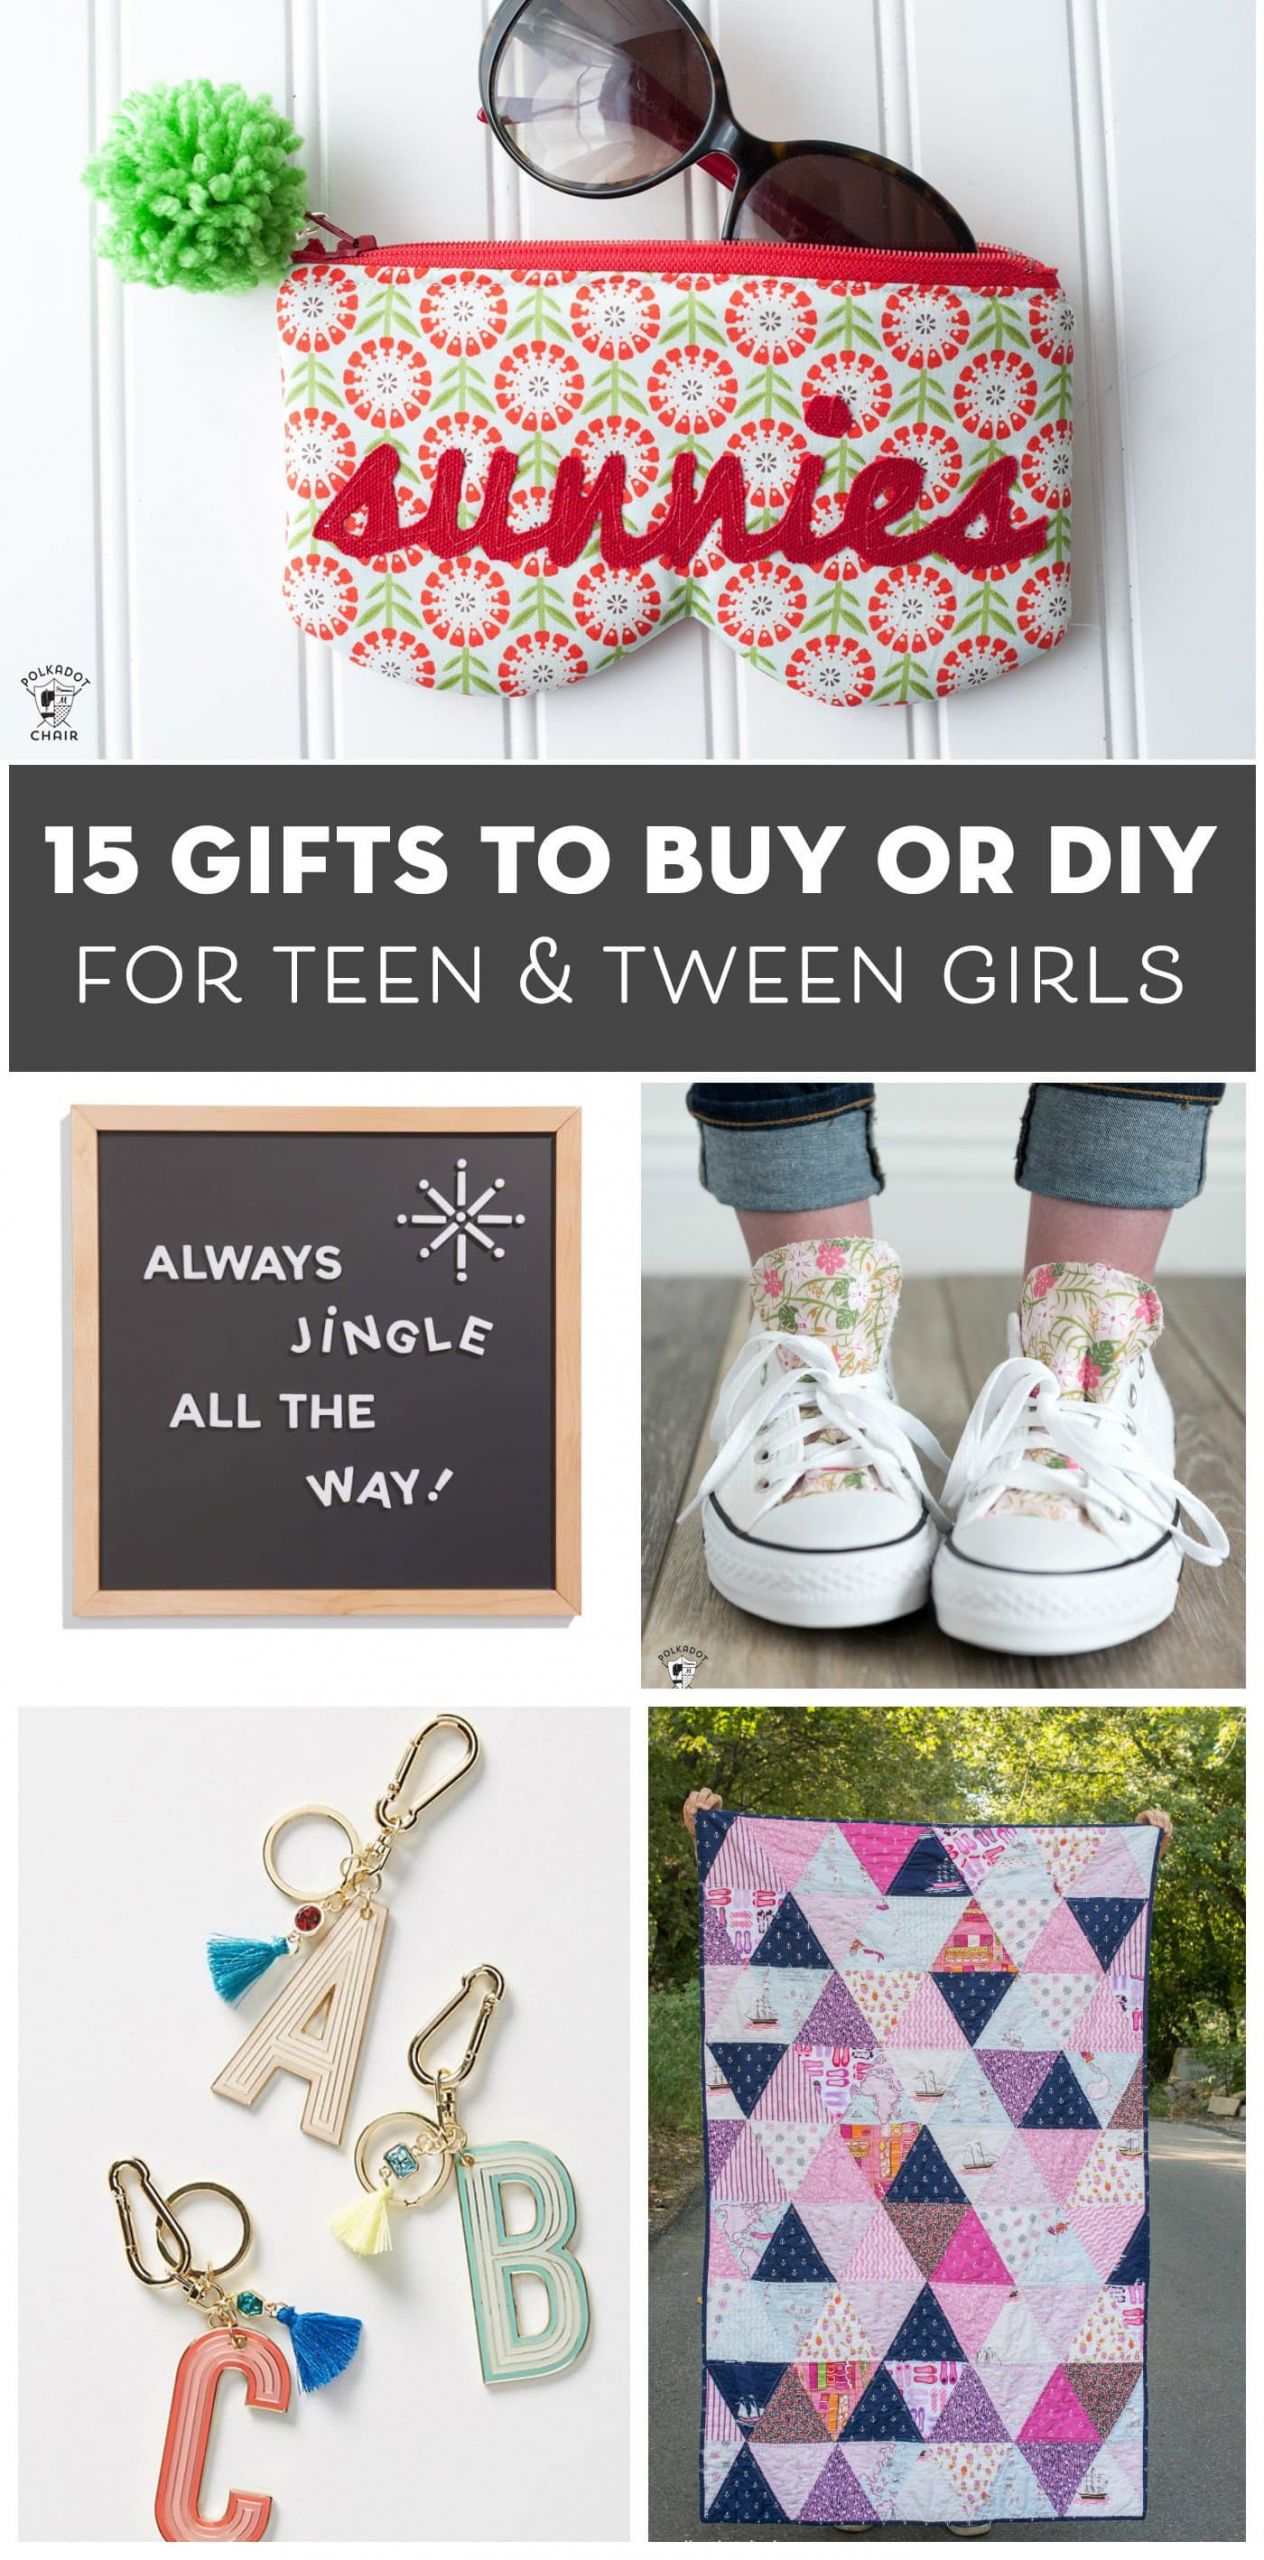 Gift Ideas Girls
 15 Gift Ideas for Teenage Girls That You Can DIY or Buy